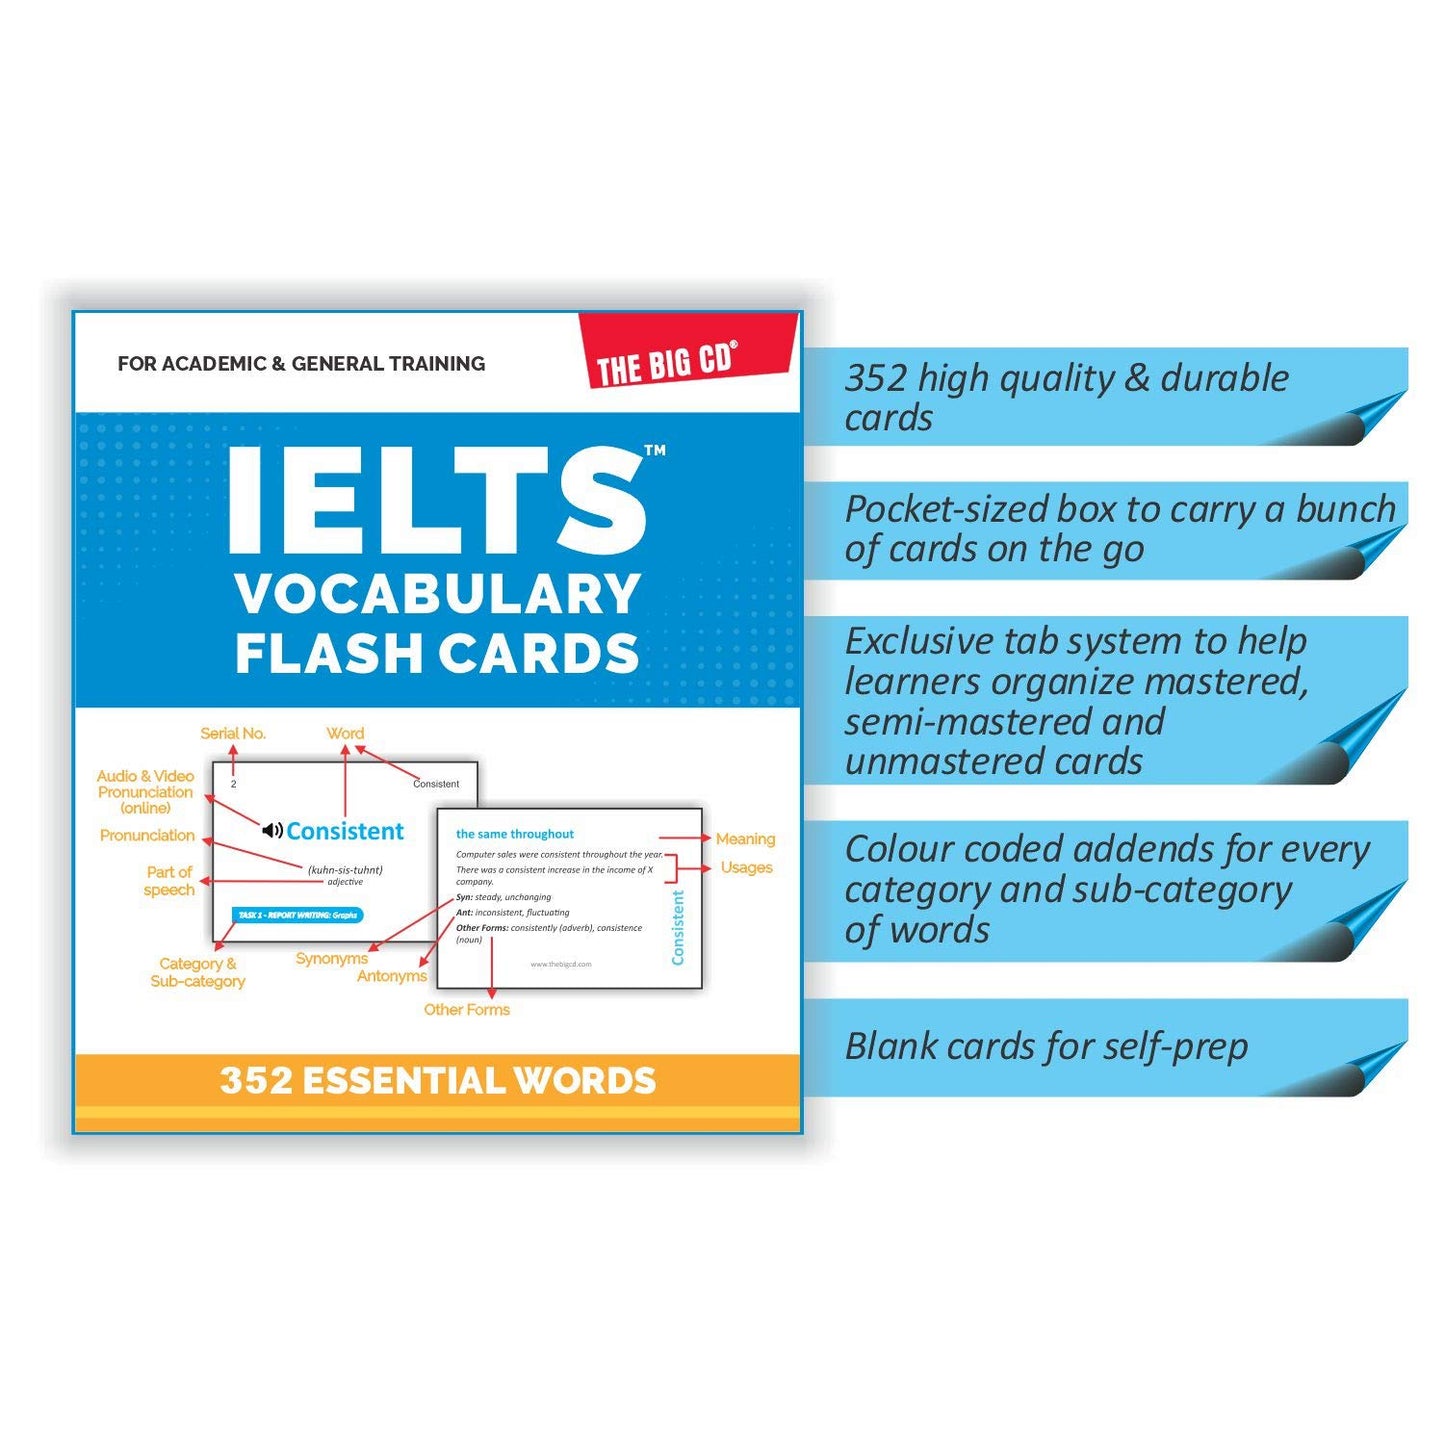 IELTS FLASH CARDS + GRE FLASH CARDS + 10 GRE Practice Tests - Test Prep Series - Vocabulary Flash Cards & GRE Practice Tests by THE BIG CD